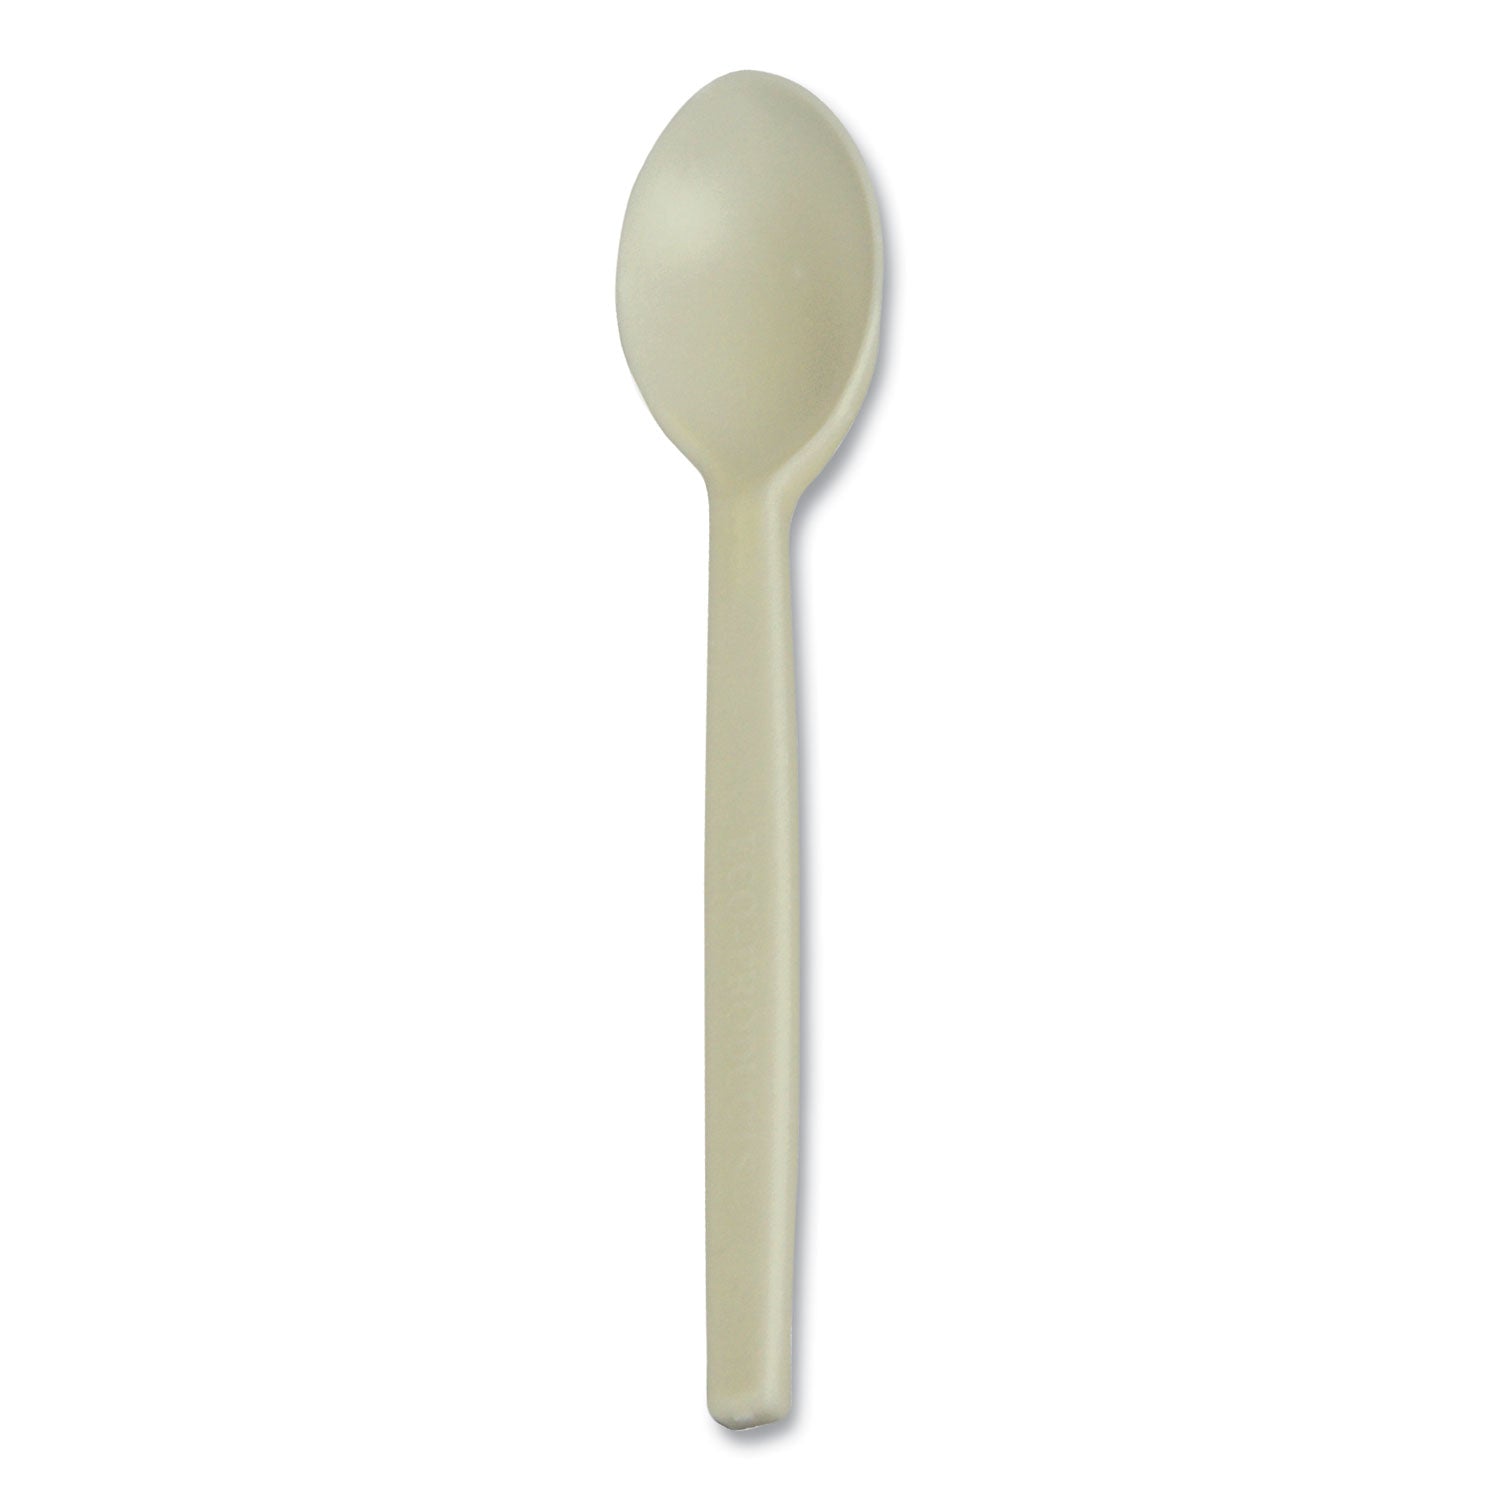 Eco-Products - Plant Starch Teaspoon, Cream, 50/Pack, Sold as 1 PK - 1